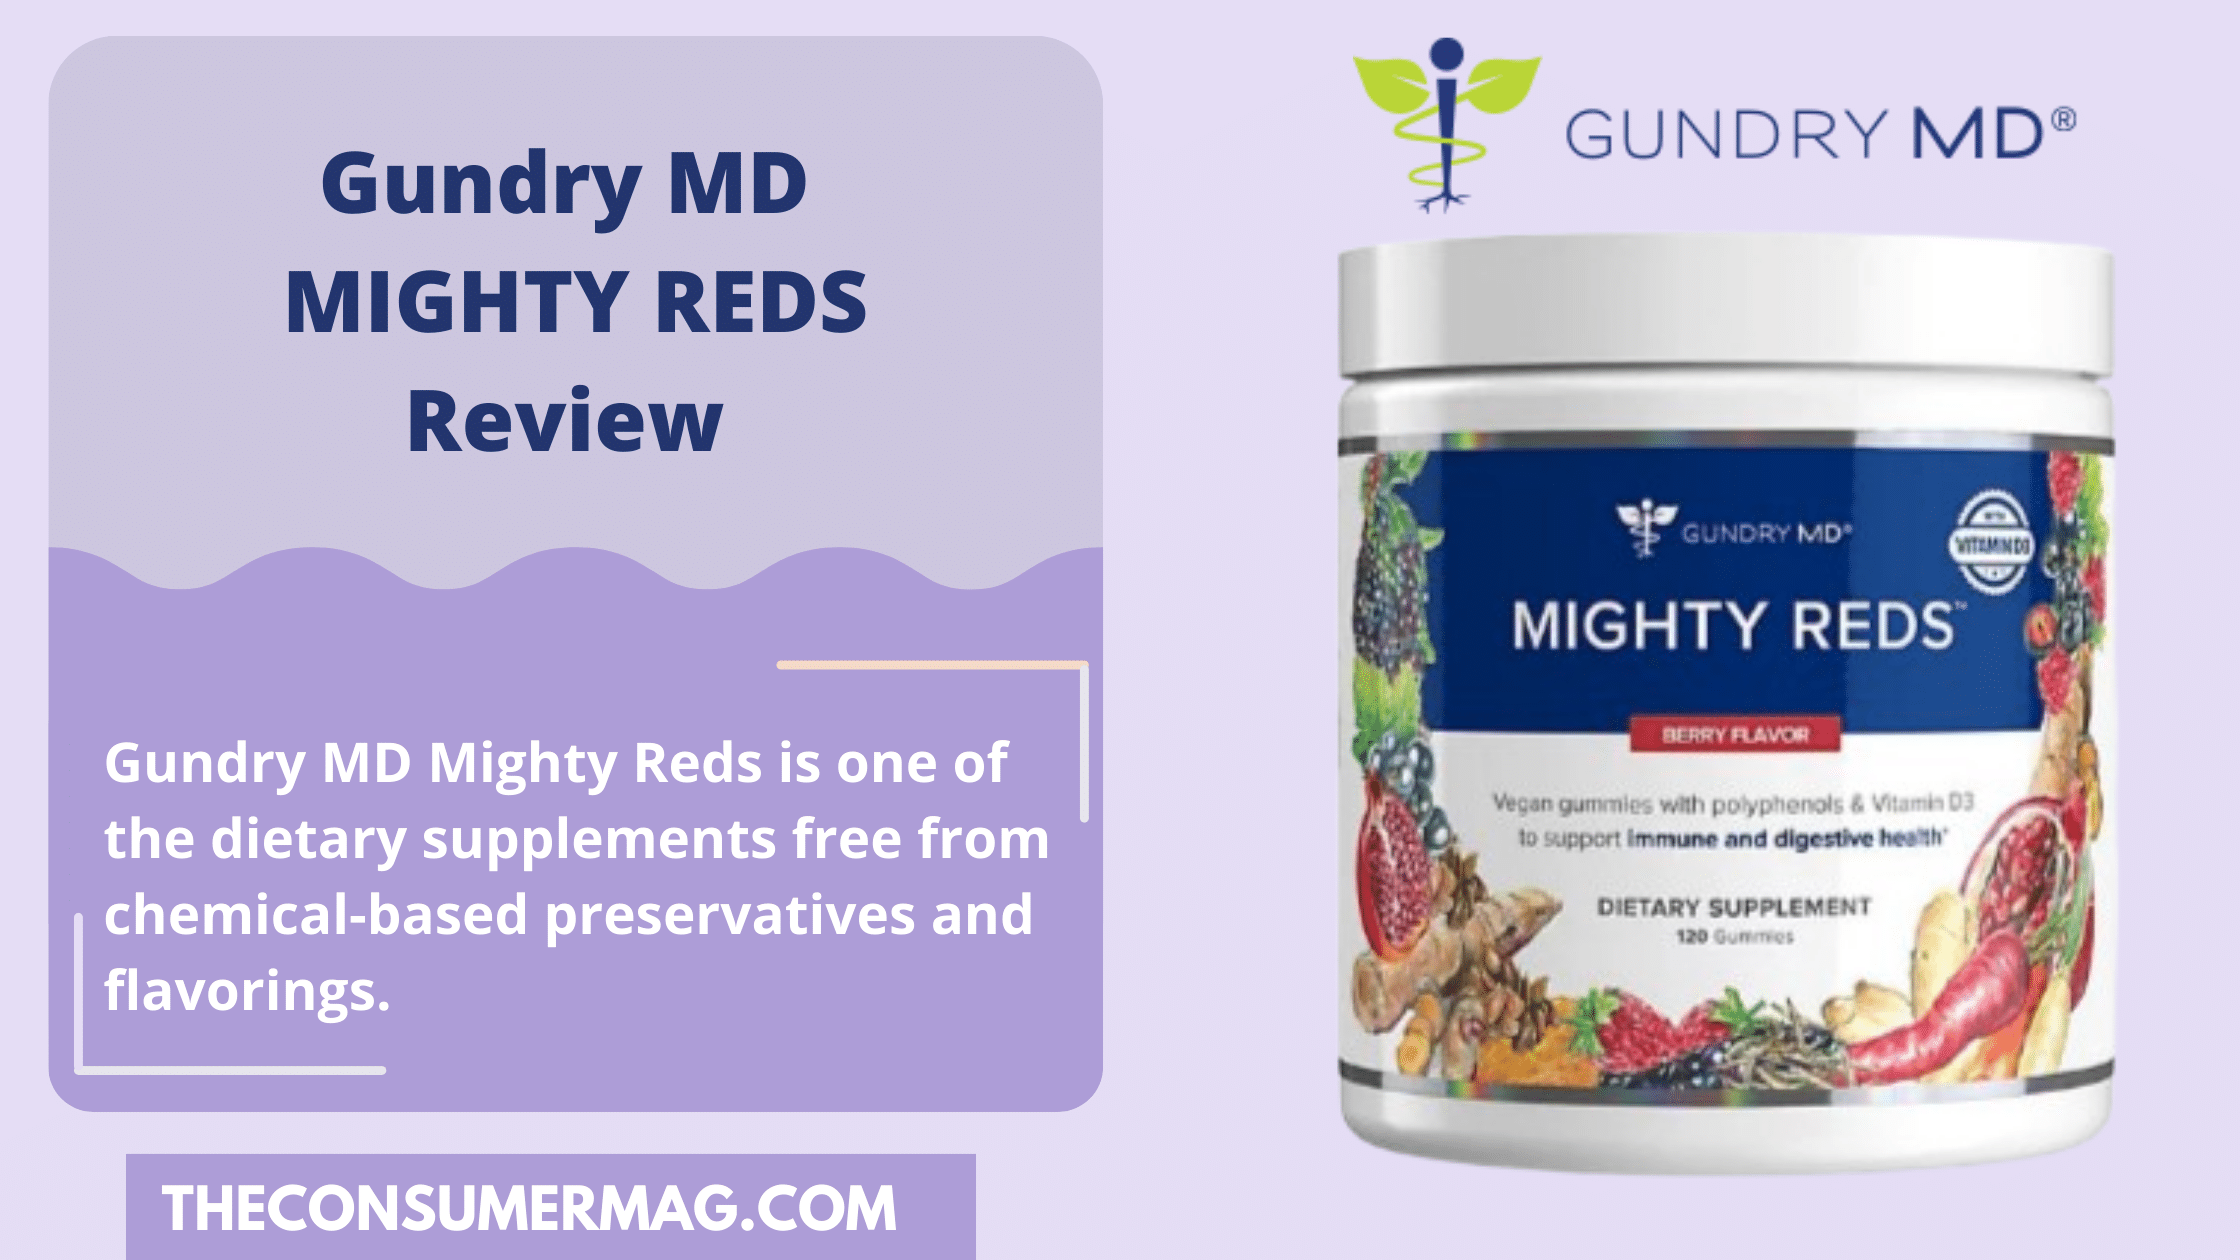 Gundry MD Mighty Reds Review | A Journey to Optimal Wellness